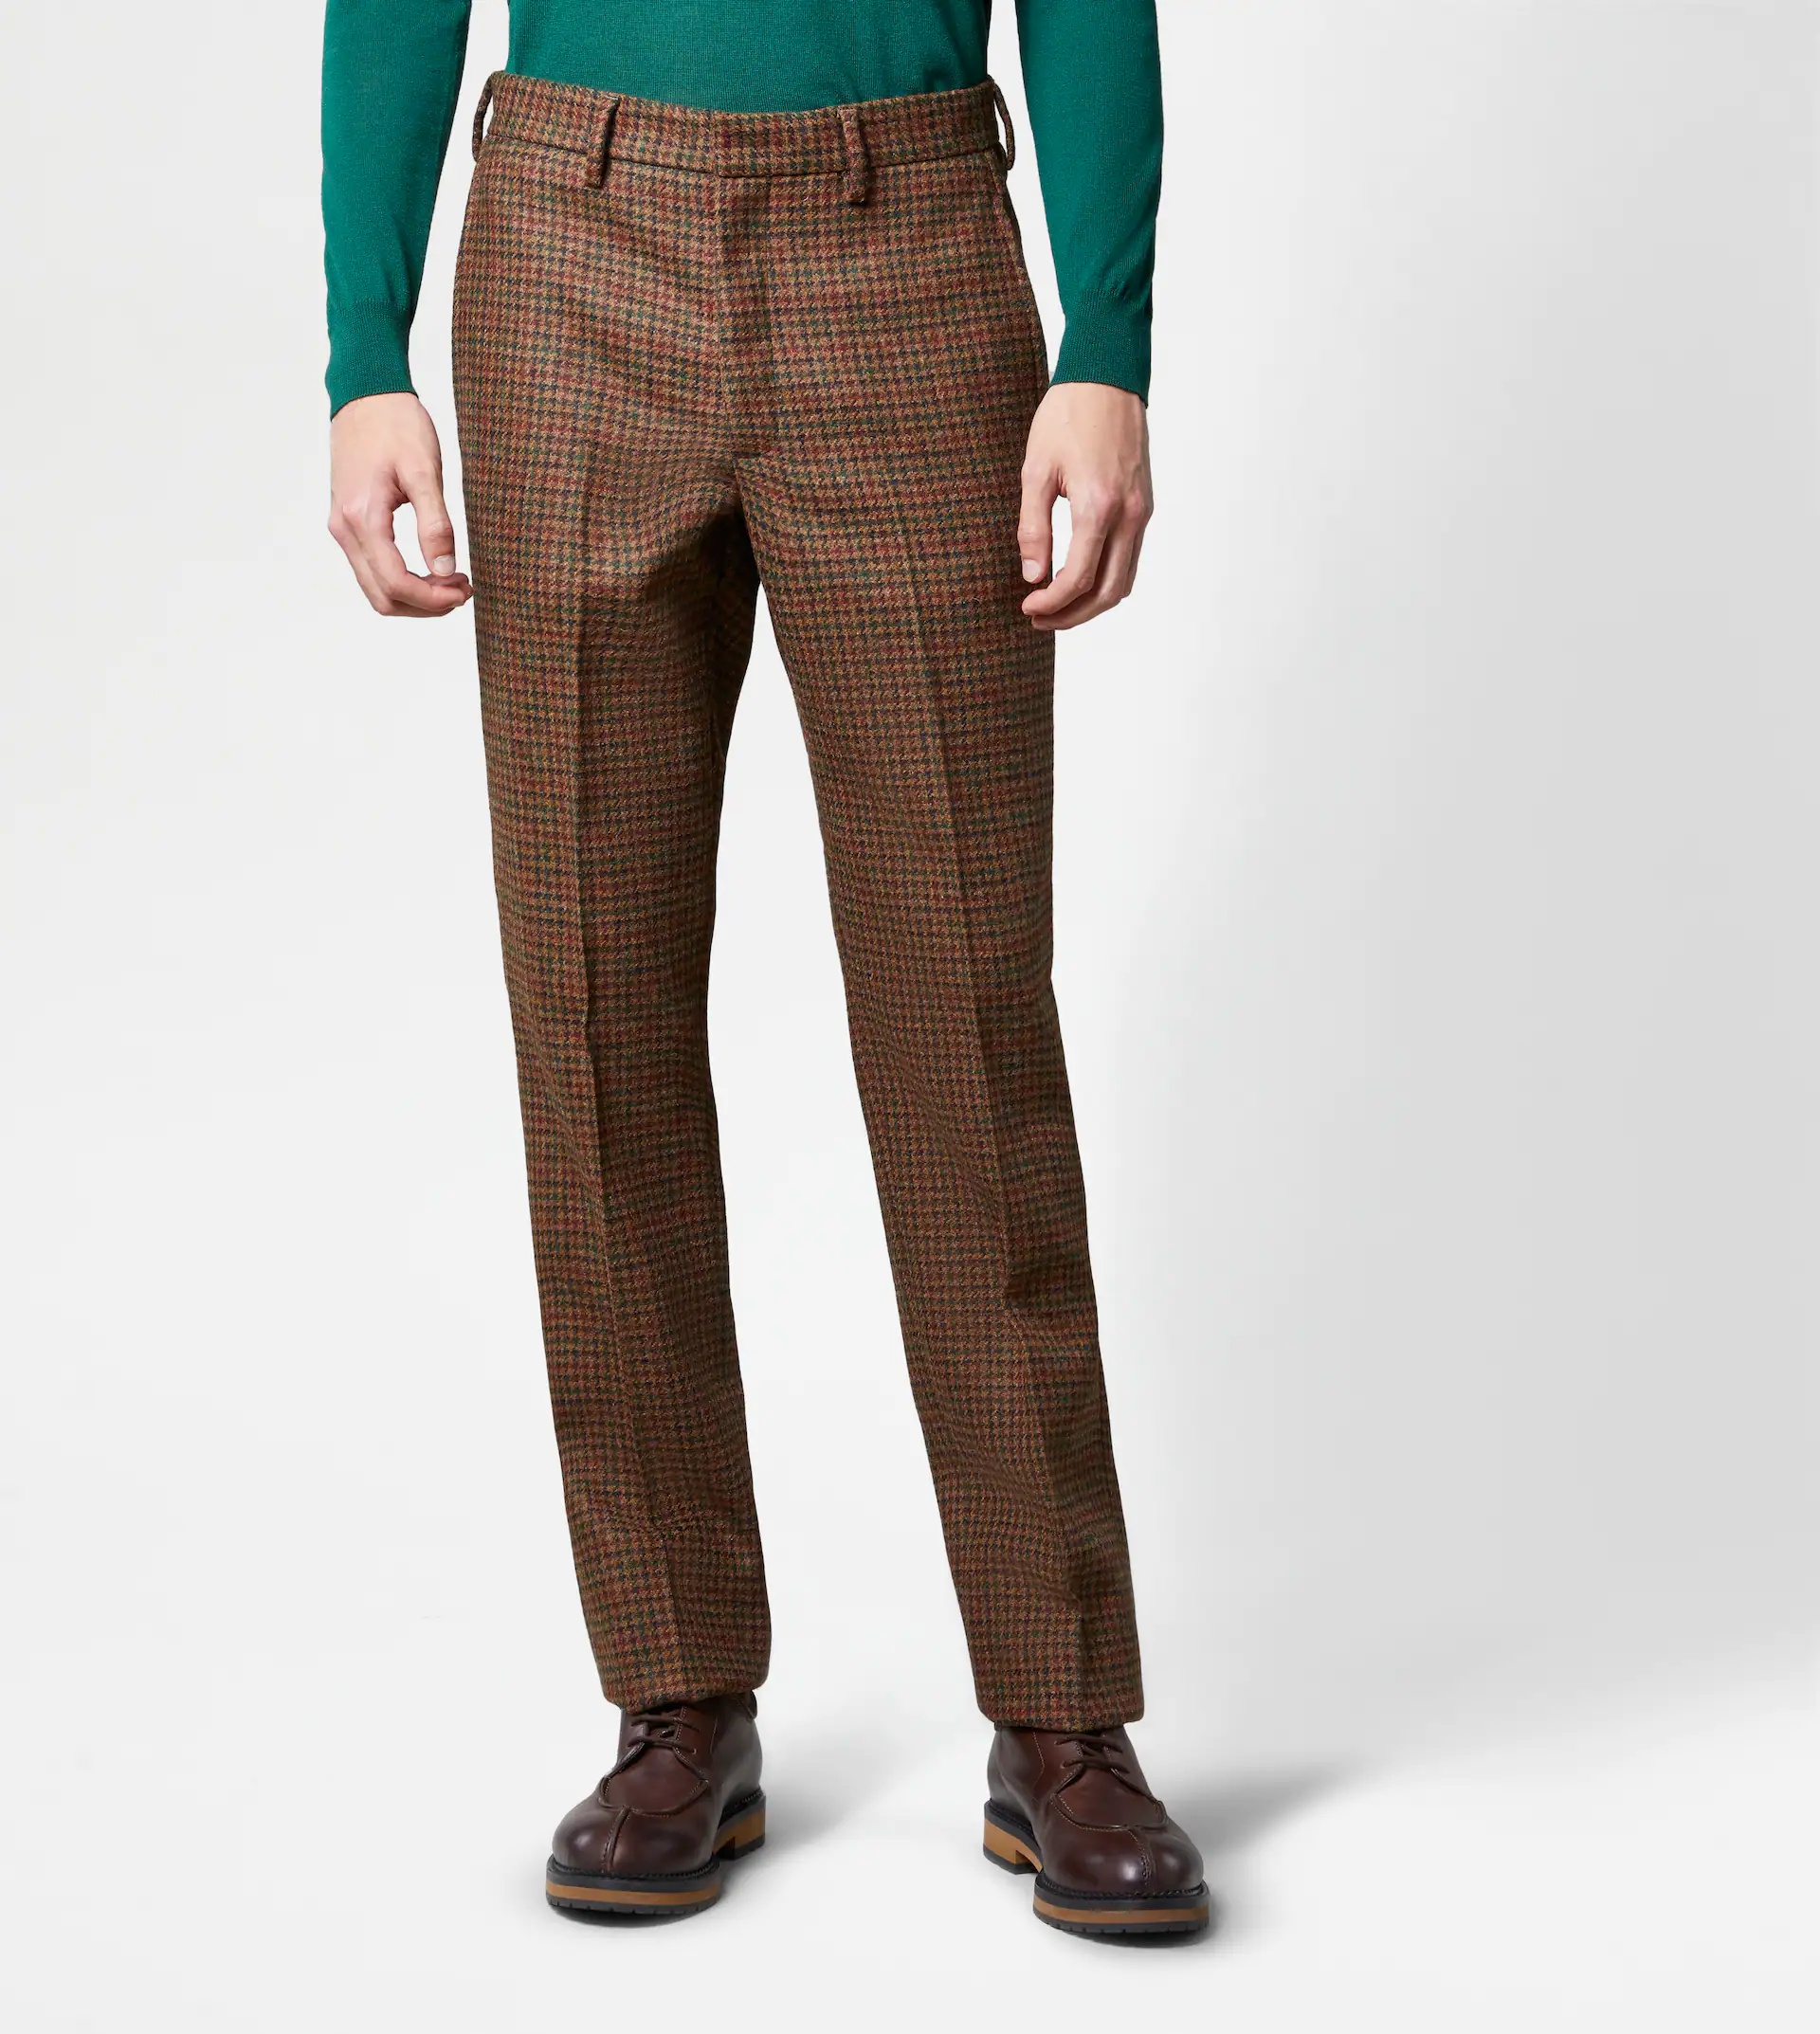 CLASSIC SHETLAND TROUSERS - BROWN, RED - 7